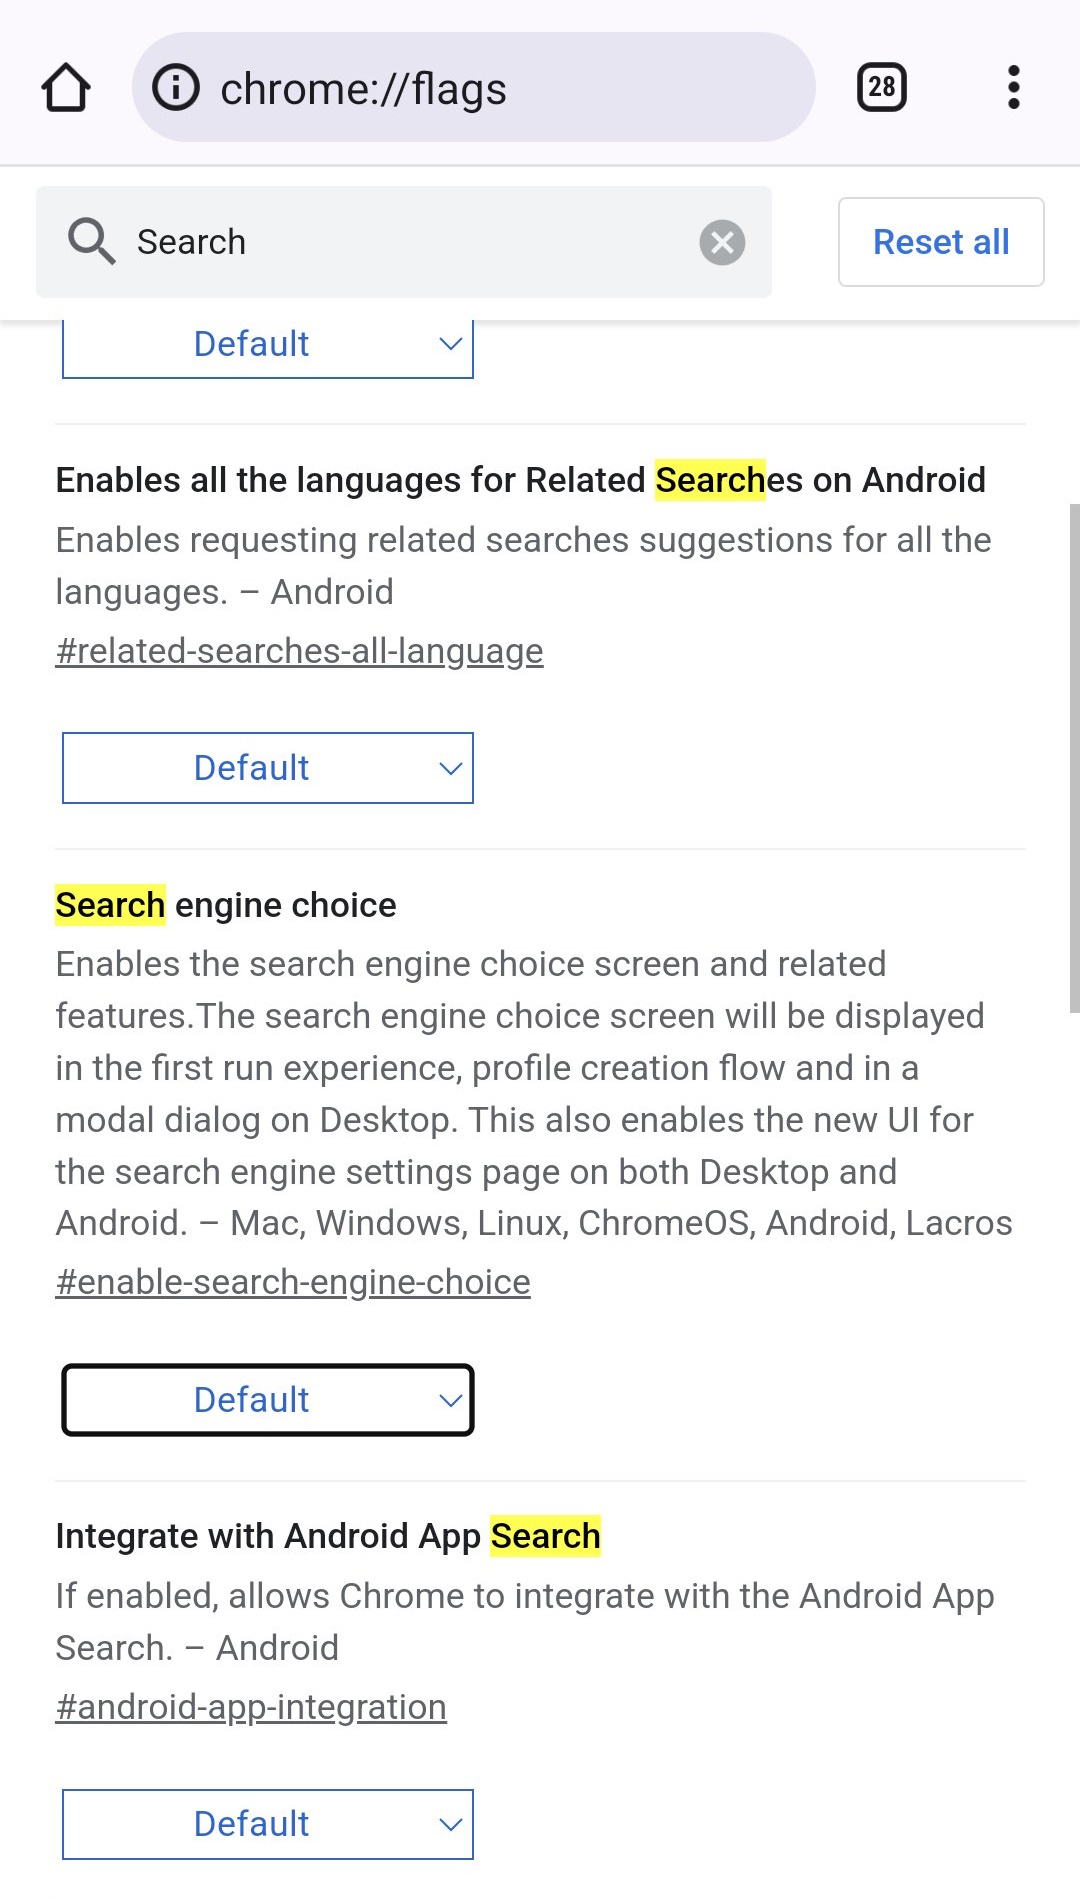 Search Enginge setting on Chrome for Android